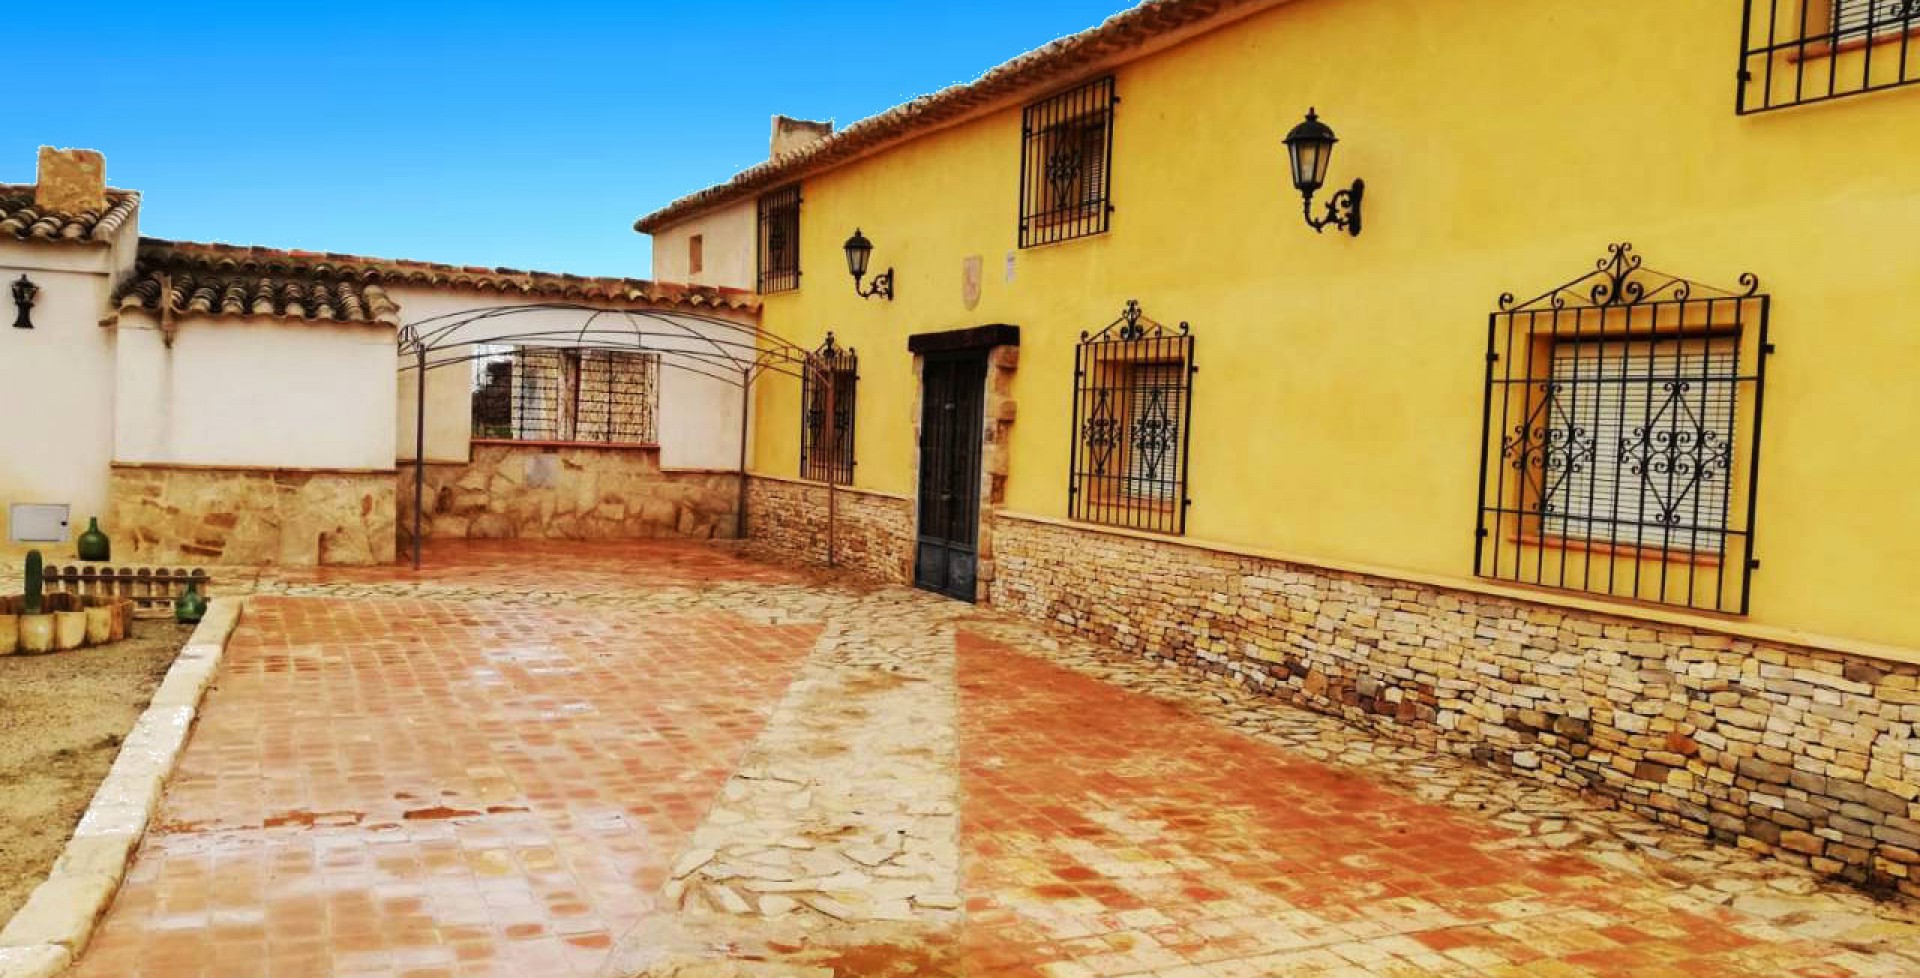 Spectacular Stately Style Country House, Ricote, Murcia, Spain